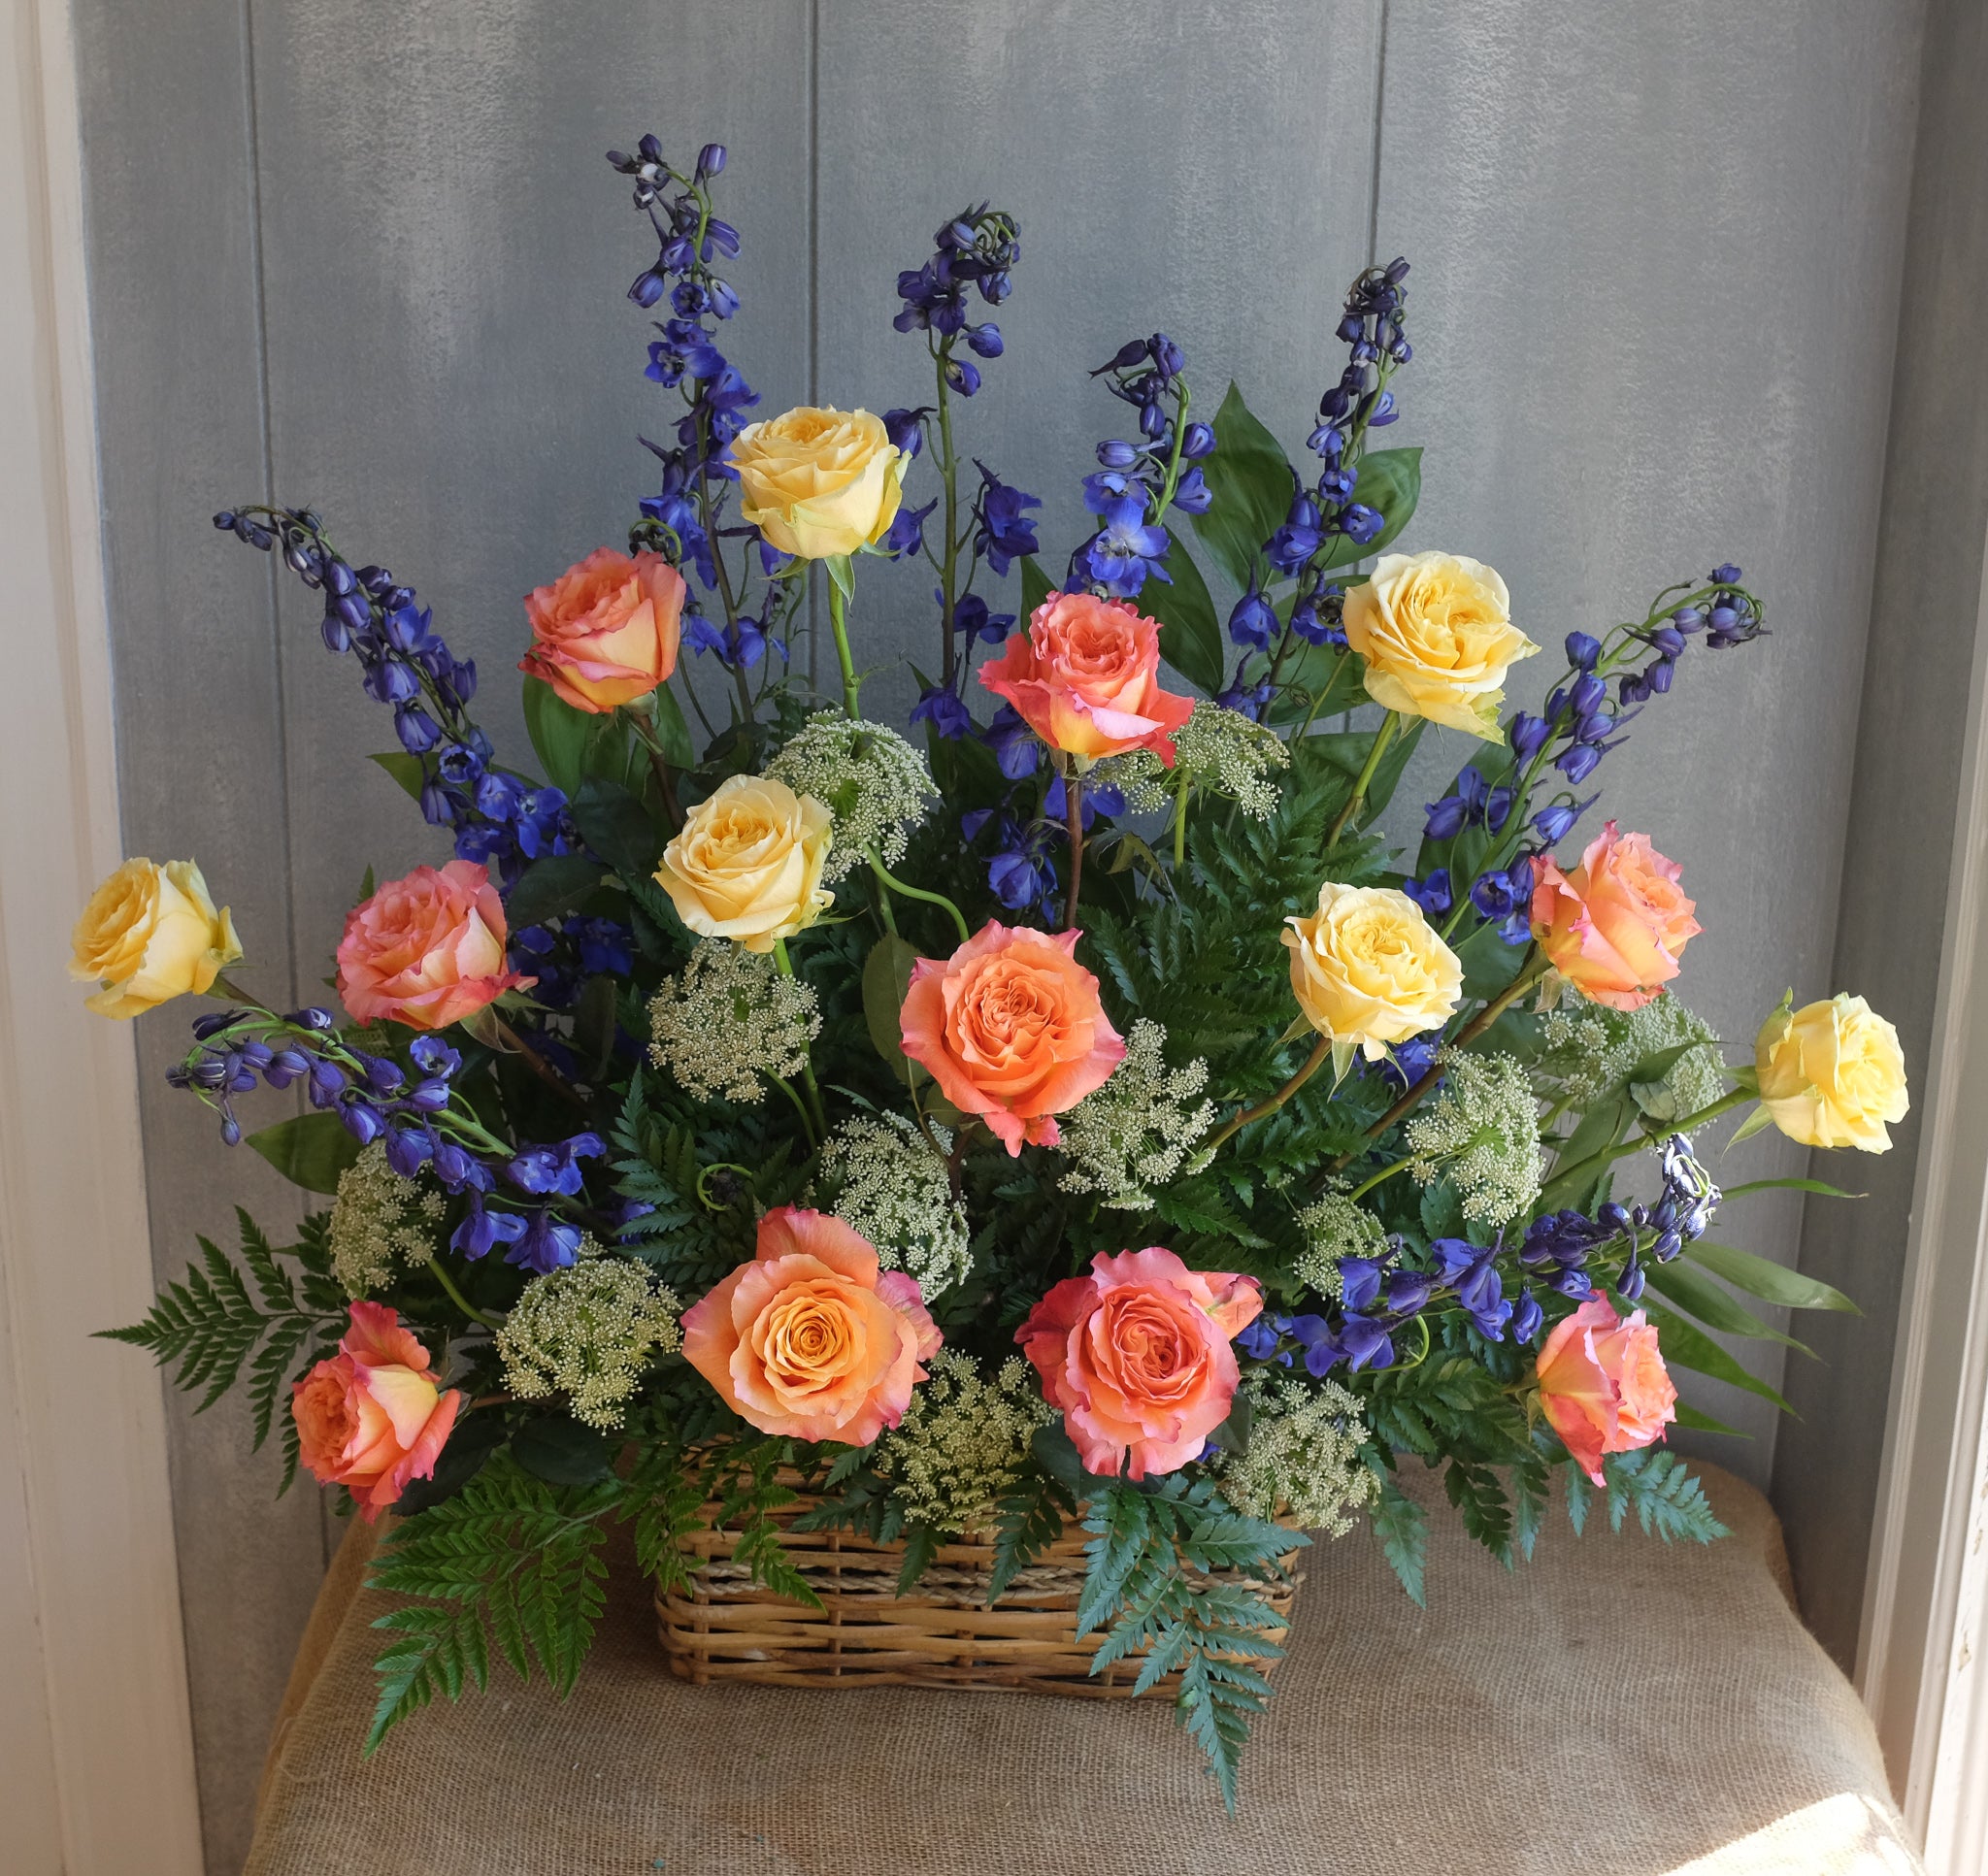 Flower basket with yellow and orange roses and blue delphinium